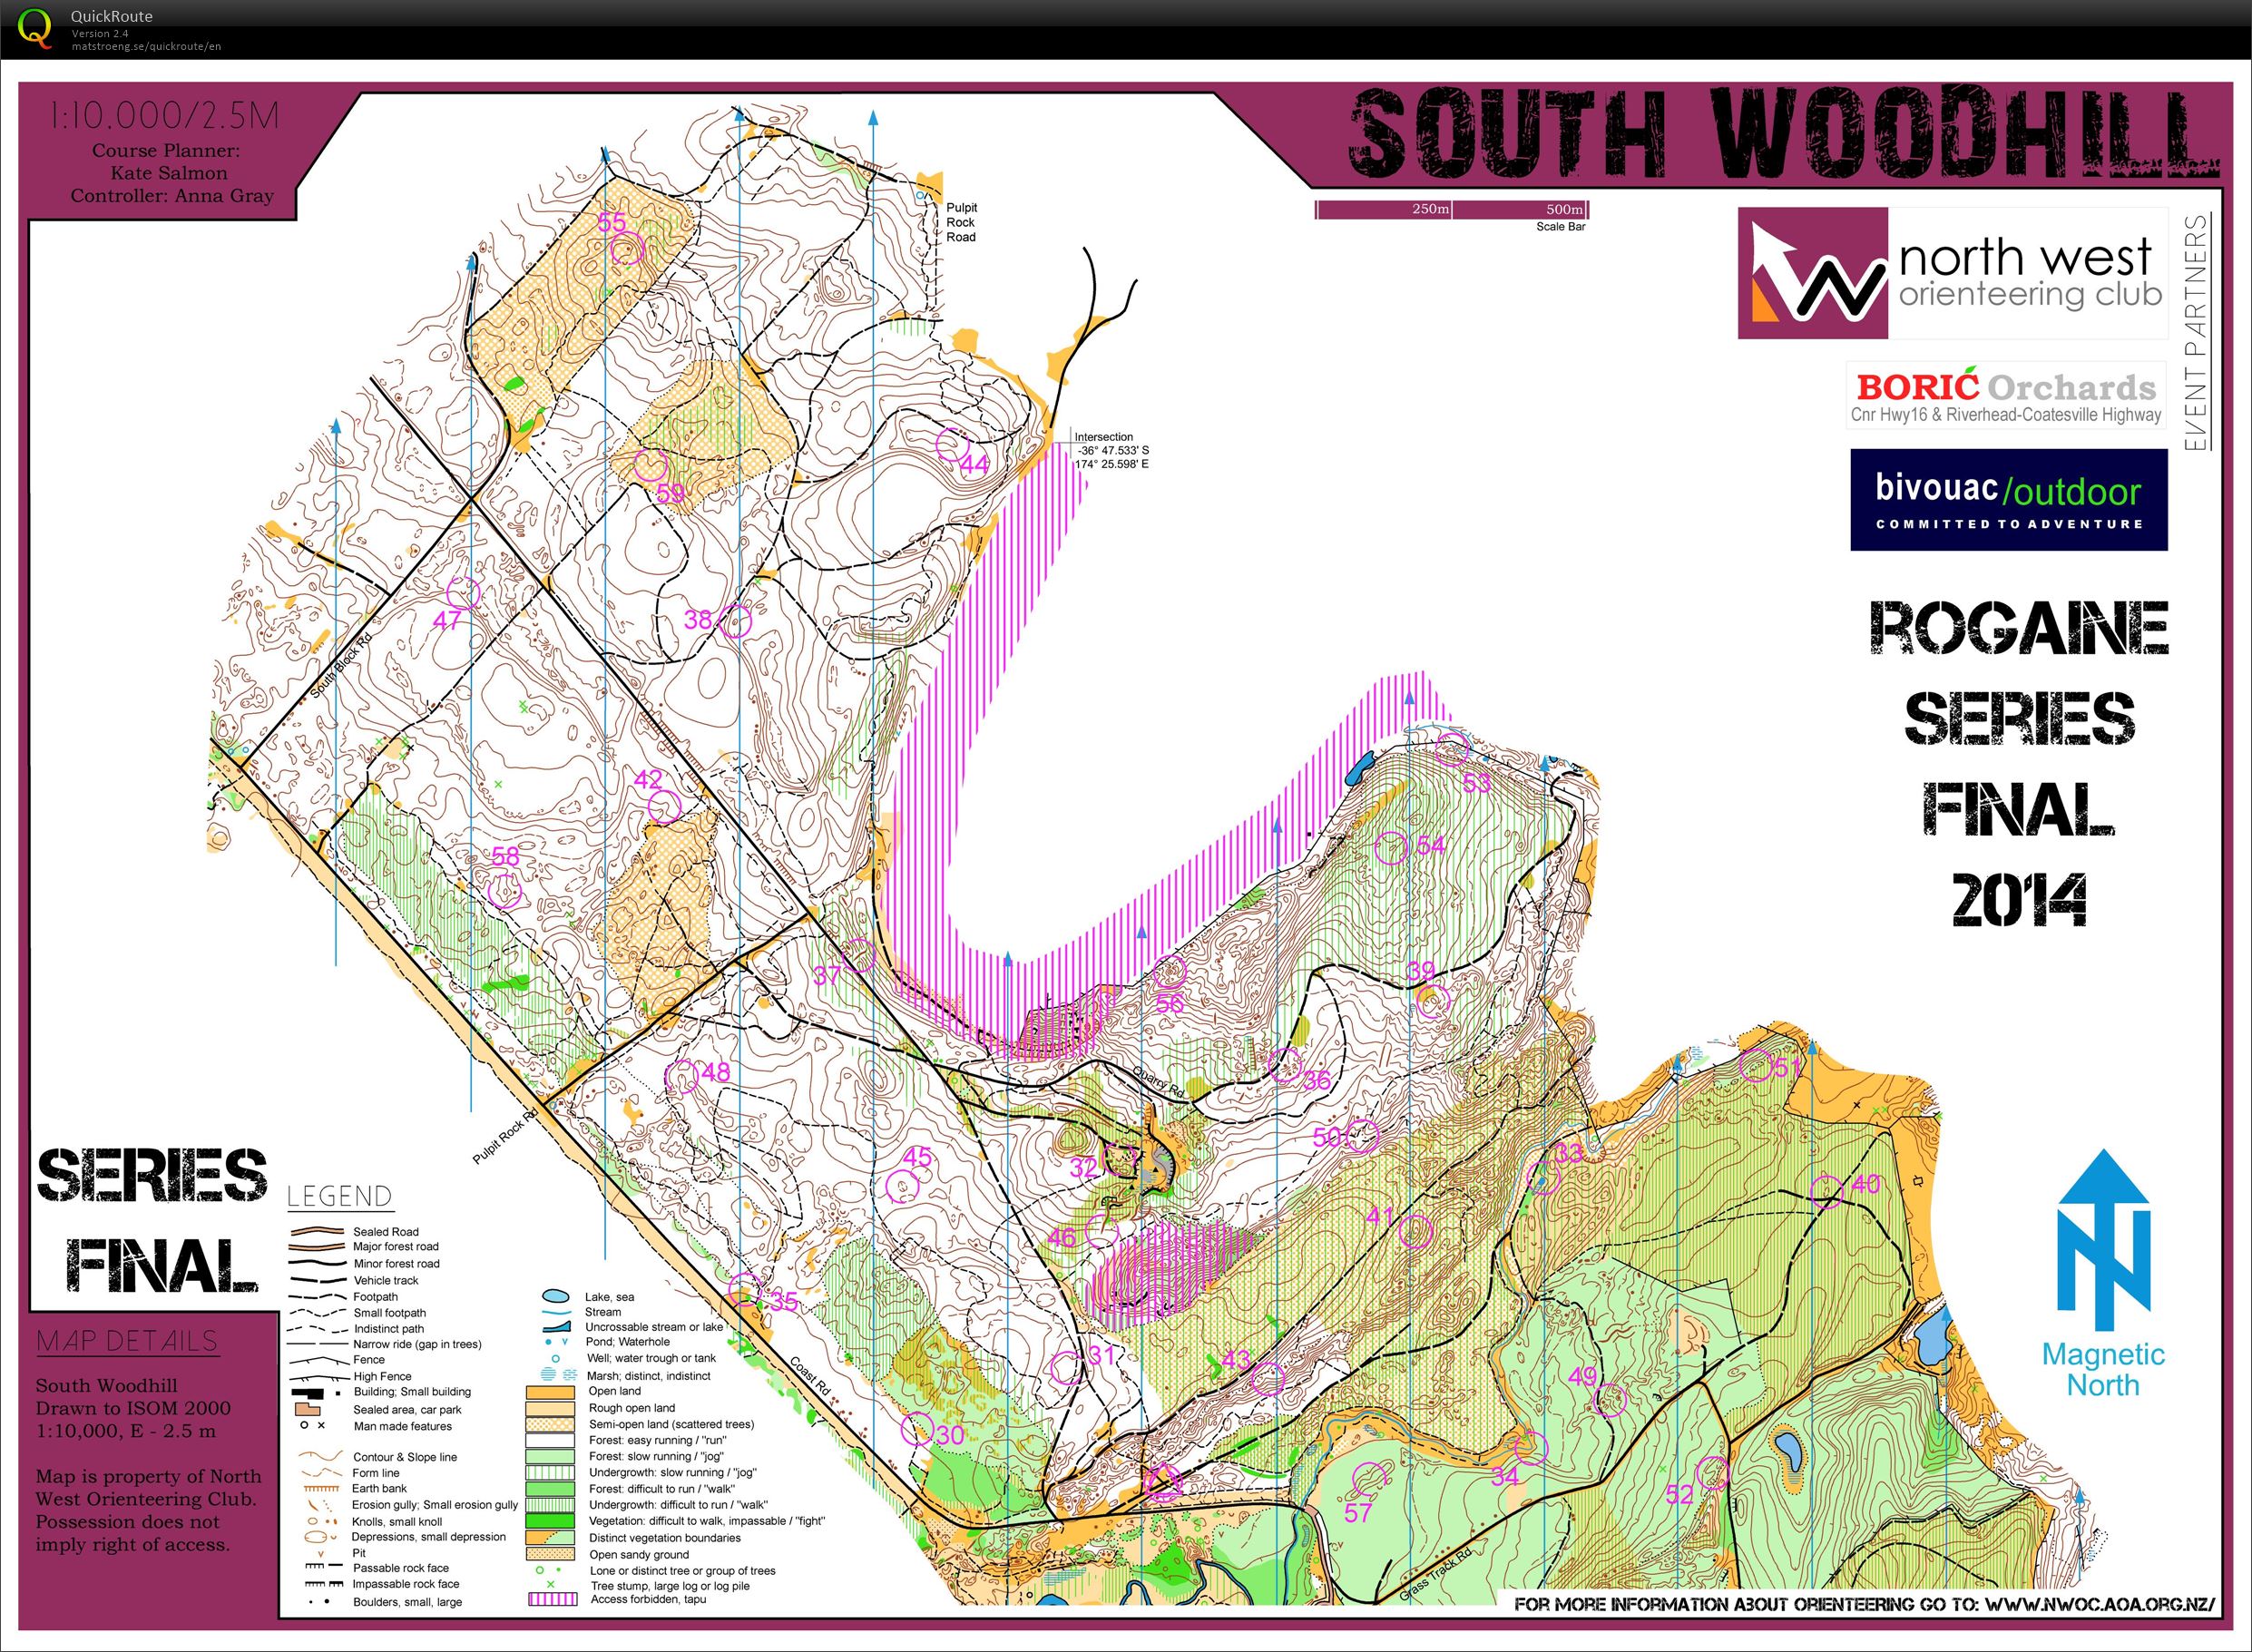 Rogaine Series - Part 4 - South Woodhill (2014-06-08)